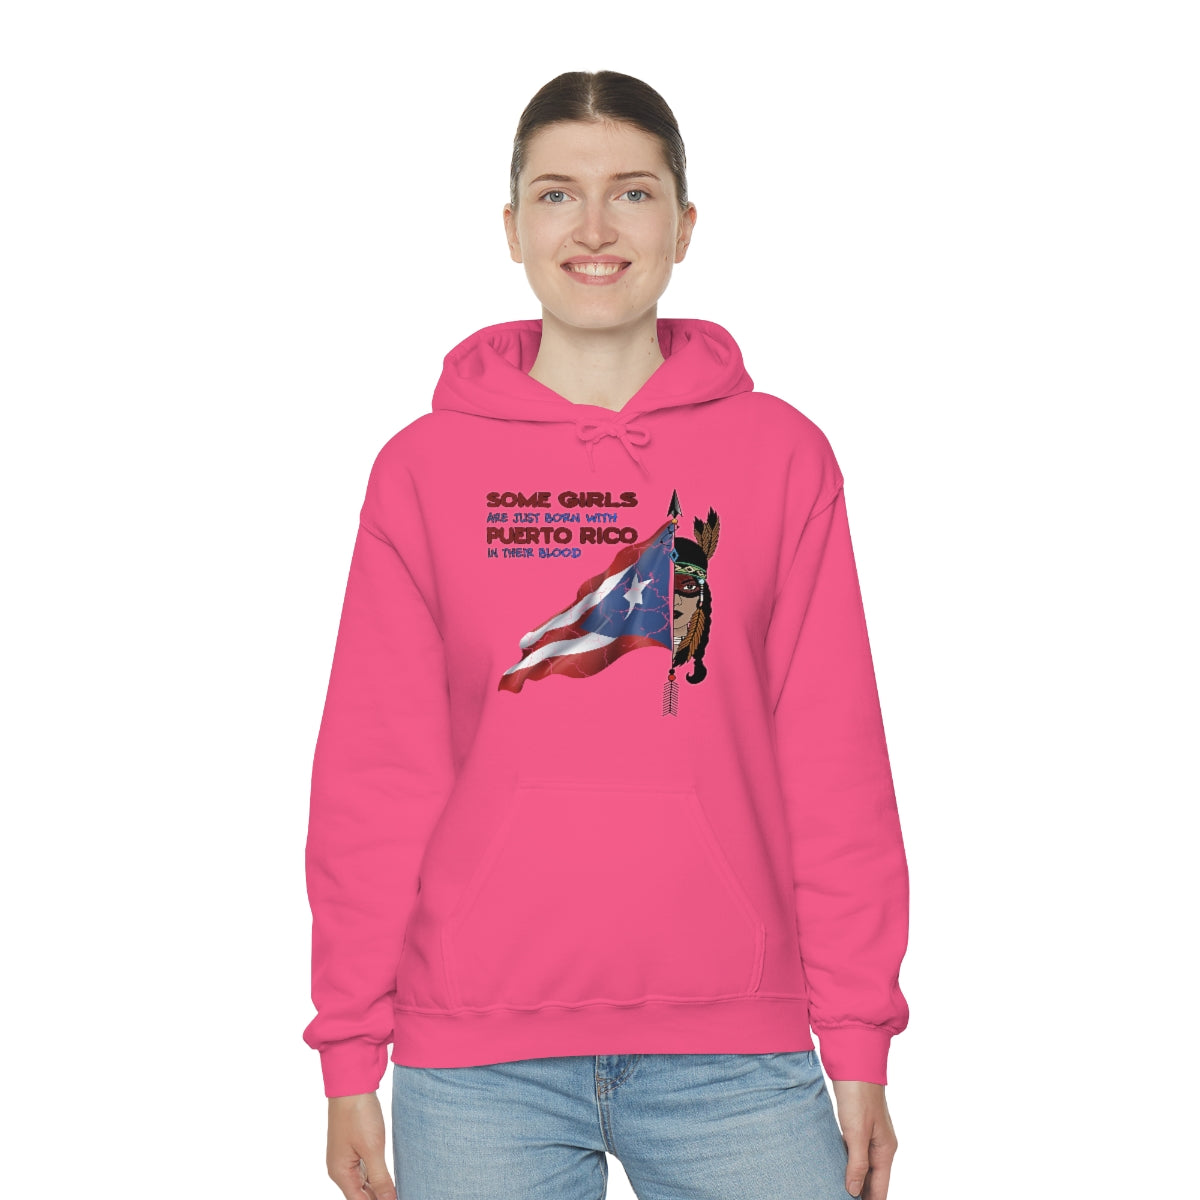 Some Girls Are Just Born With It - Unisex Heavy Blend™ Hoodie (Sm-5XL)